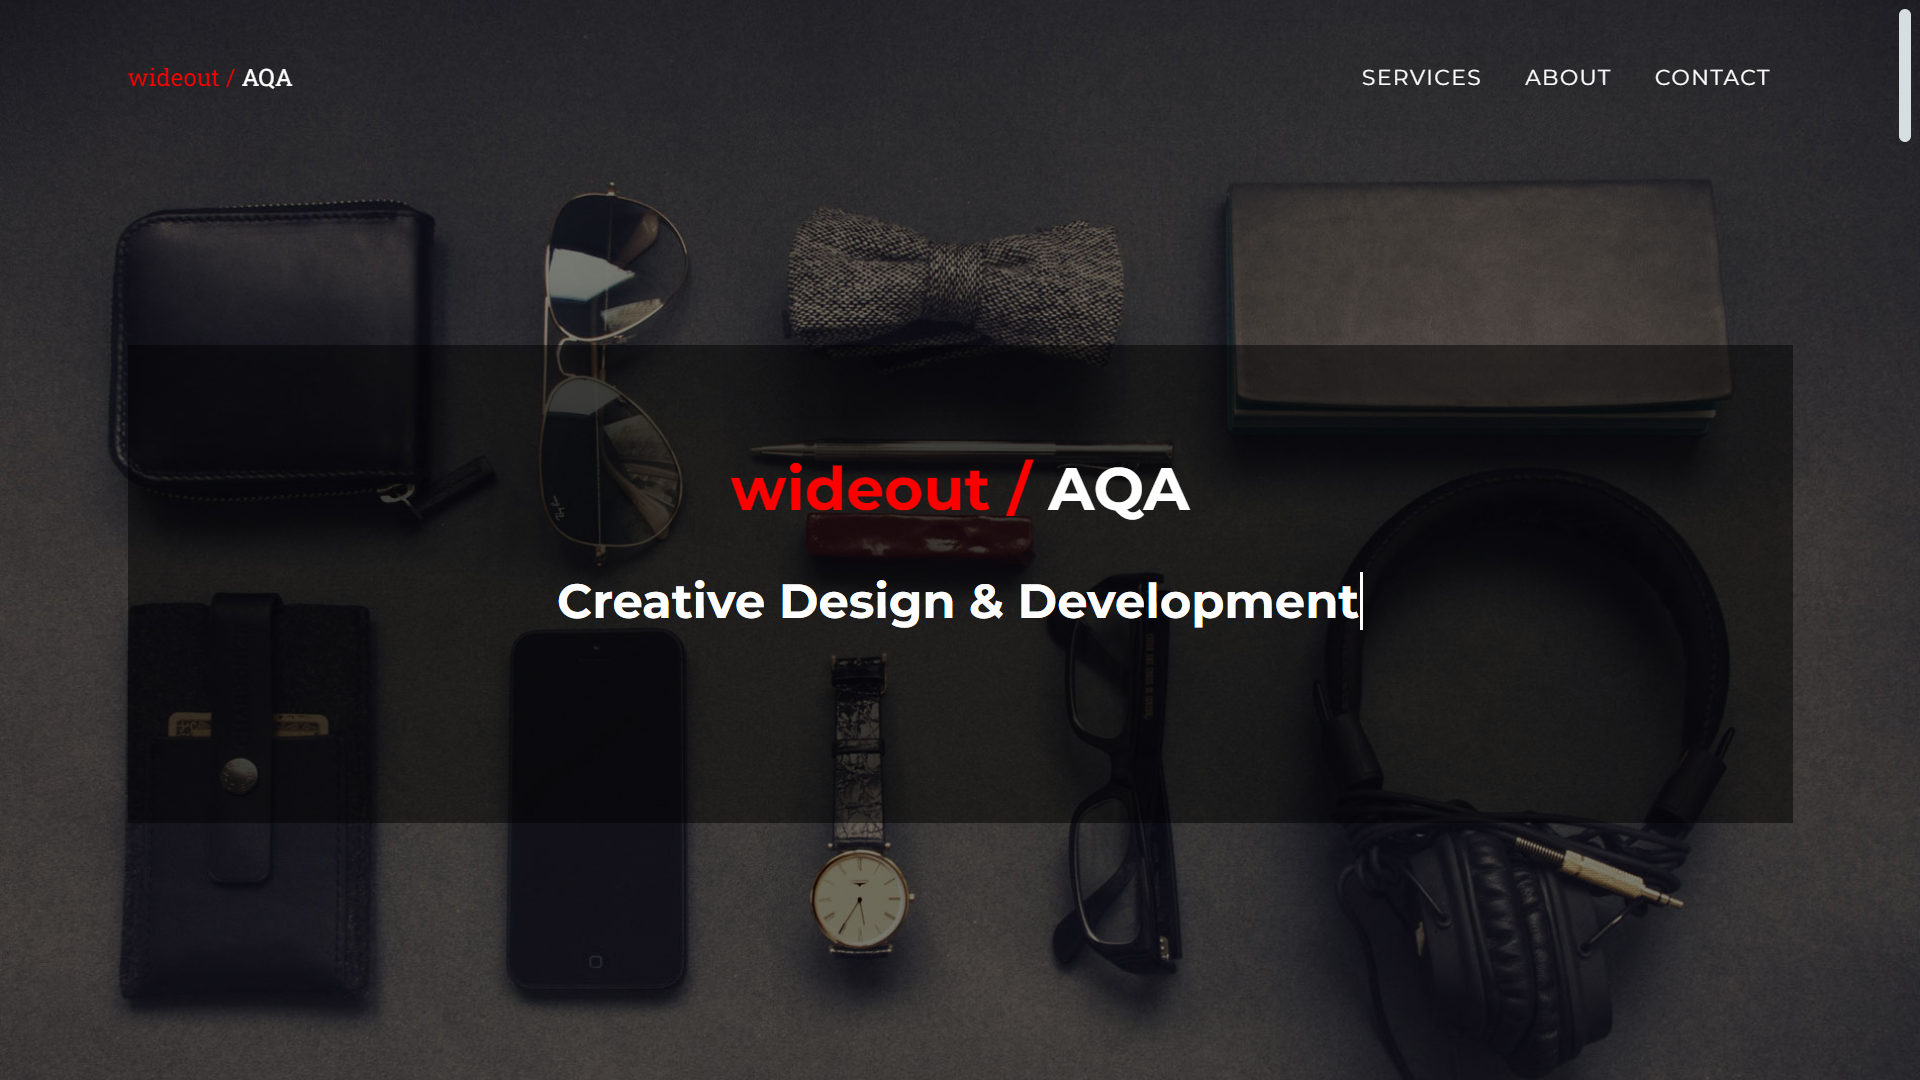 Rebrand case study for Wideout/AQA